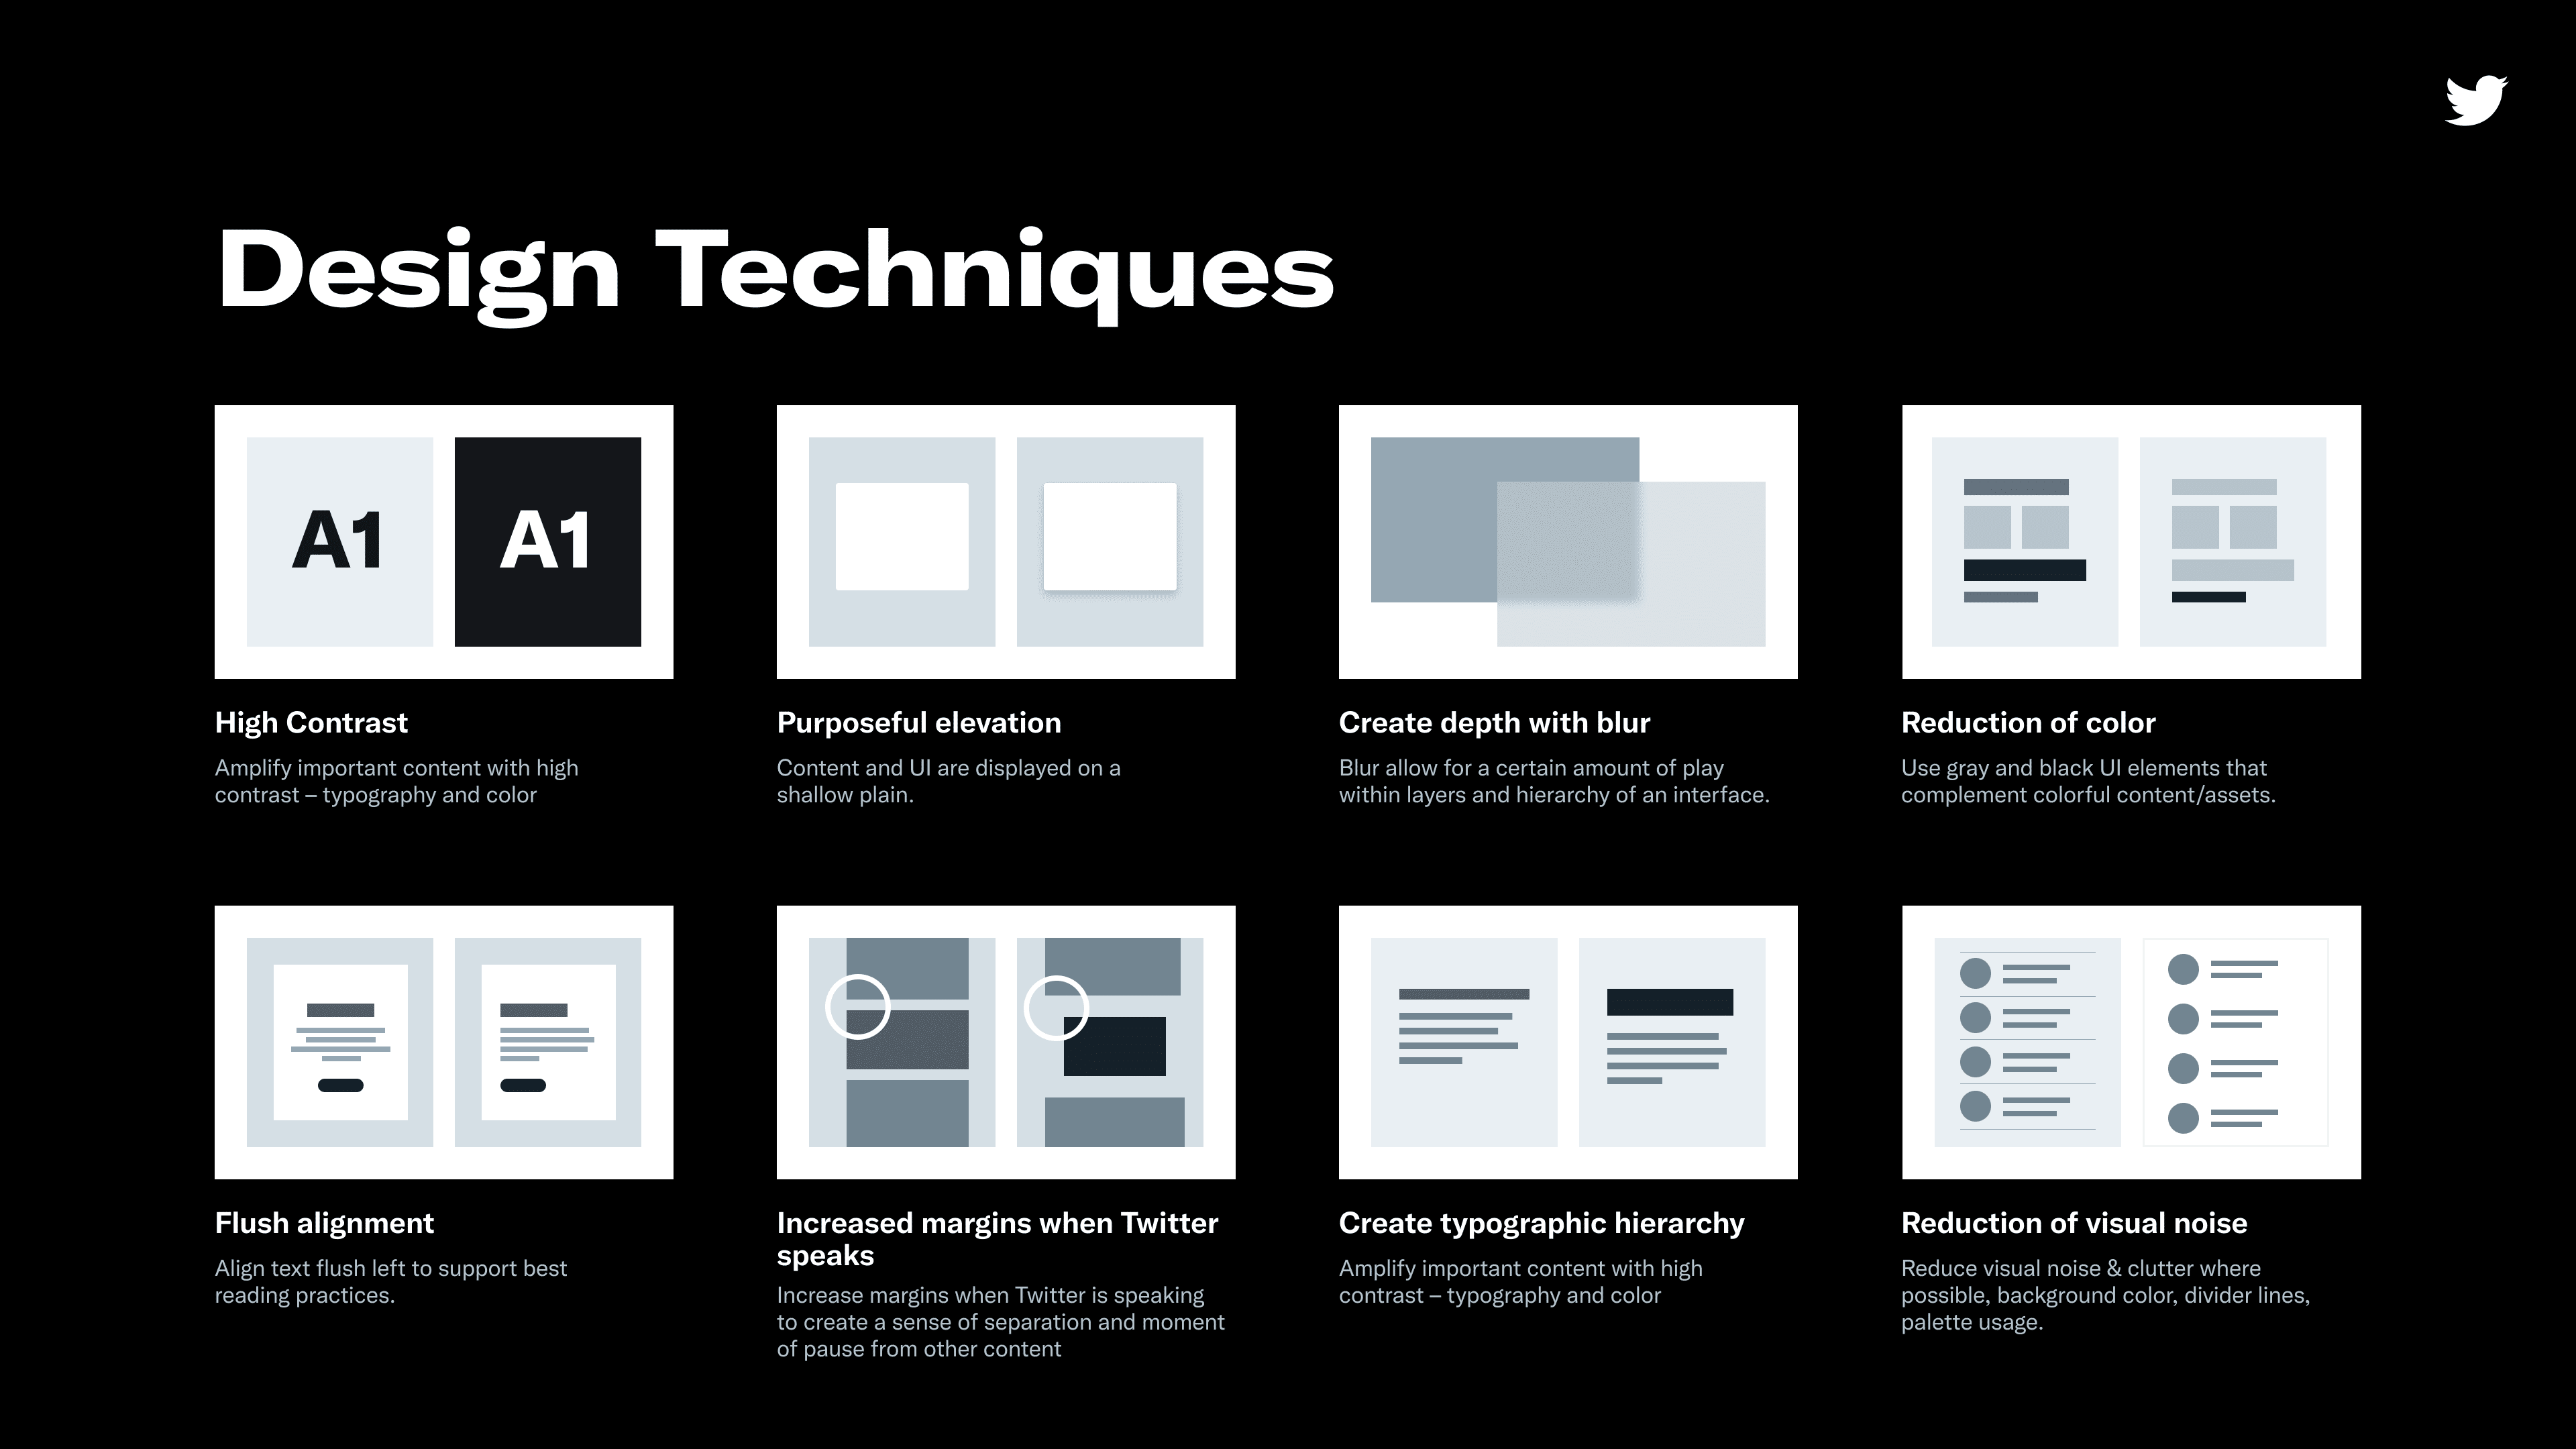 Design Techniques: High Contrast // Purposeful evaluation // Create depht with blur // reduction of color // flash alignment // increased margins when twitter speaks // create typographic hierarchy // reduction of visual noise